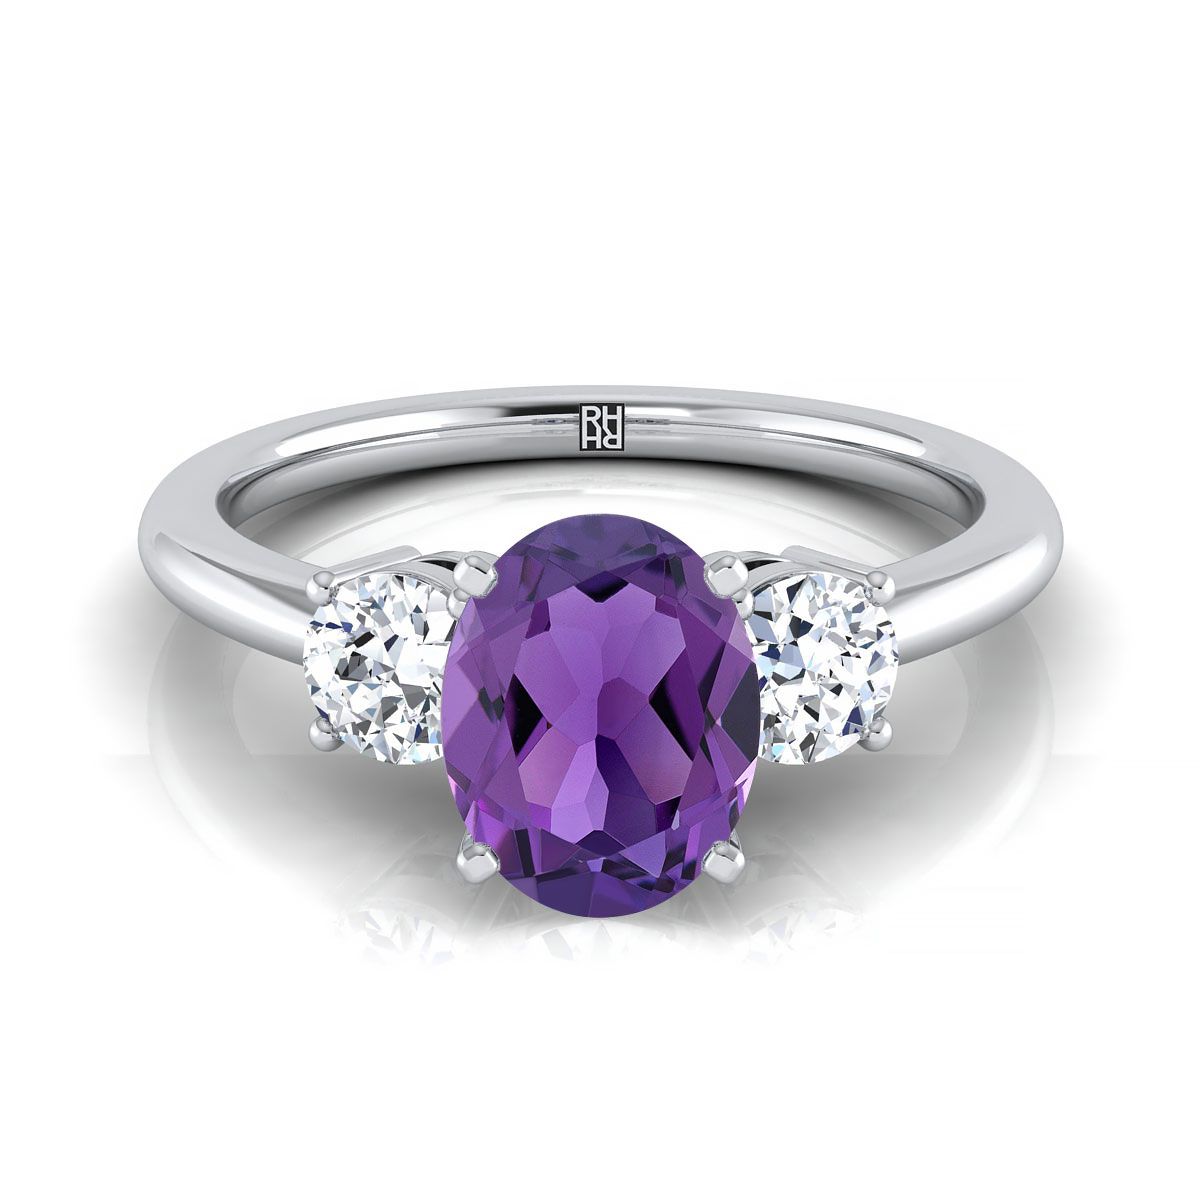 18K White Gold Oval Amethyst Perfectly Matched Round Three Stone Diamond Engagement Ring -1/4ctw